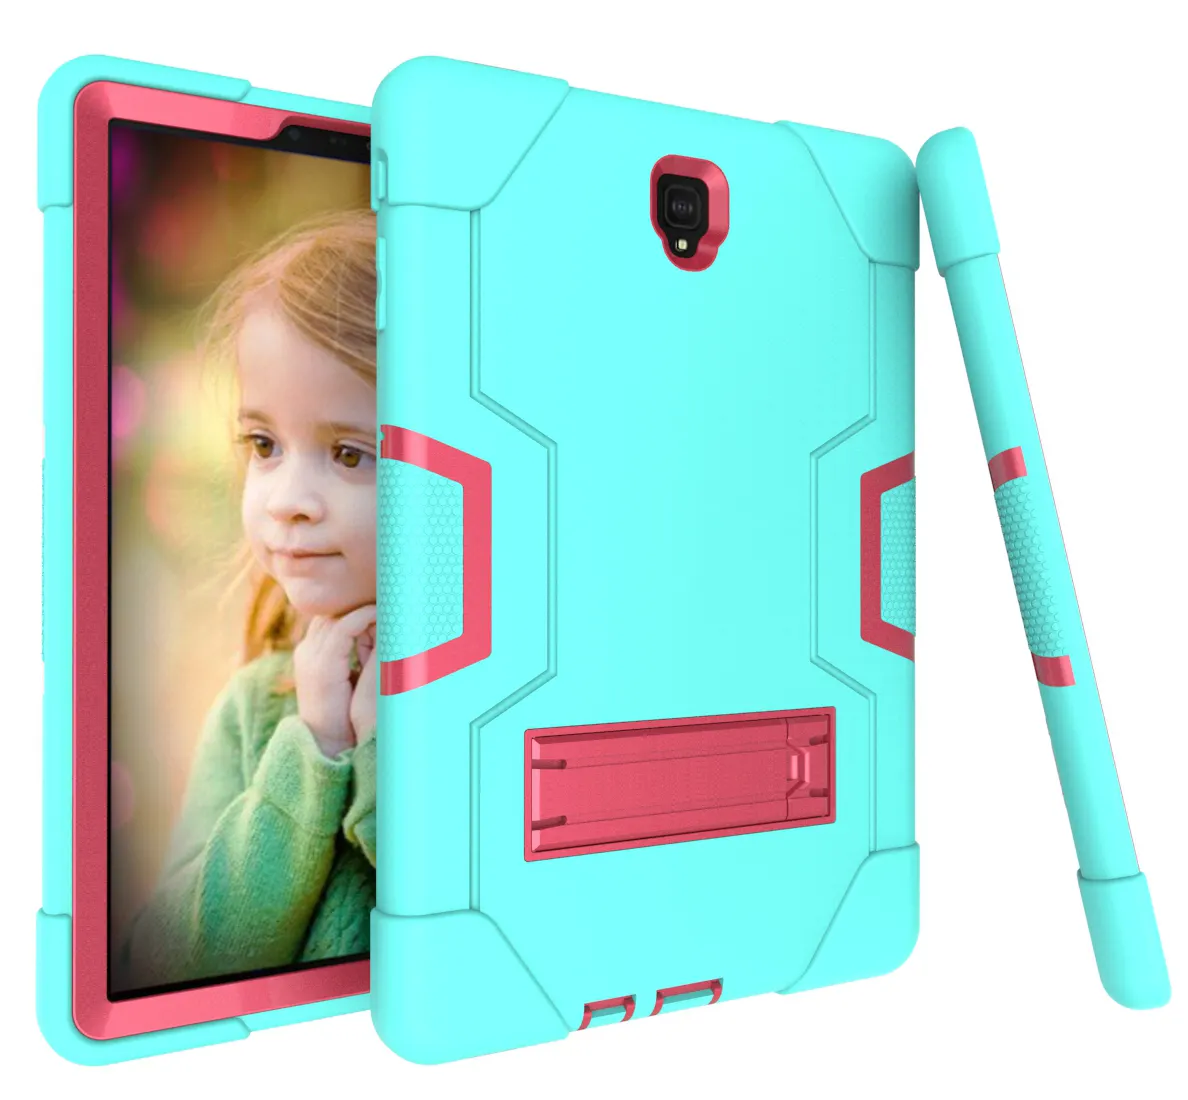 Defender Case for Samsung Galaxy Tab S4 10.5 inch T830 T835 with Kickstand Heavy Duty Shockproof Rugged Armor Tablet Cover